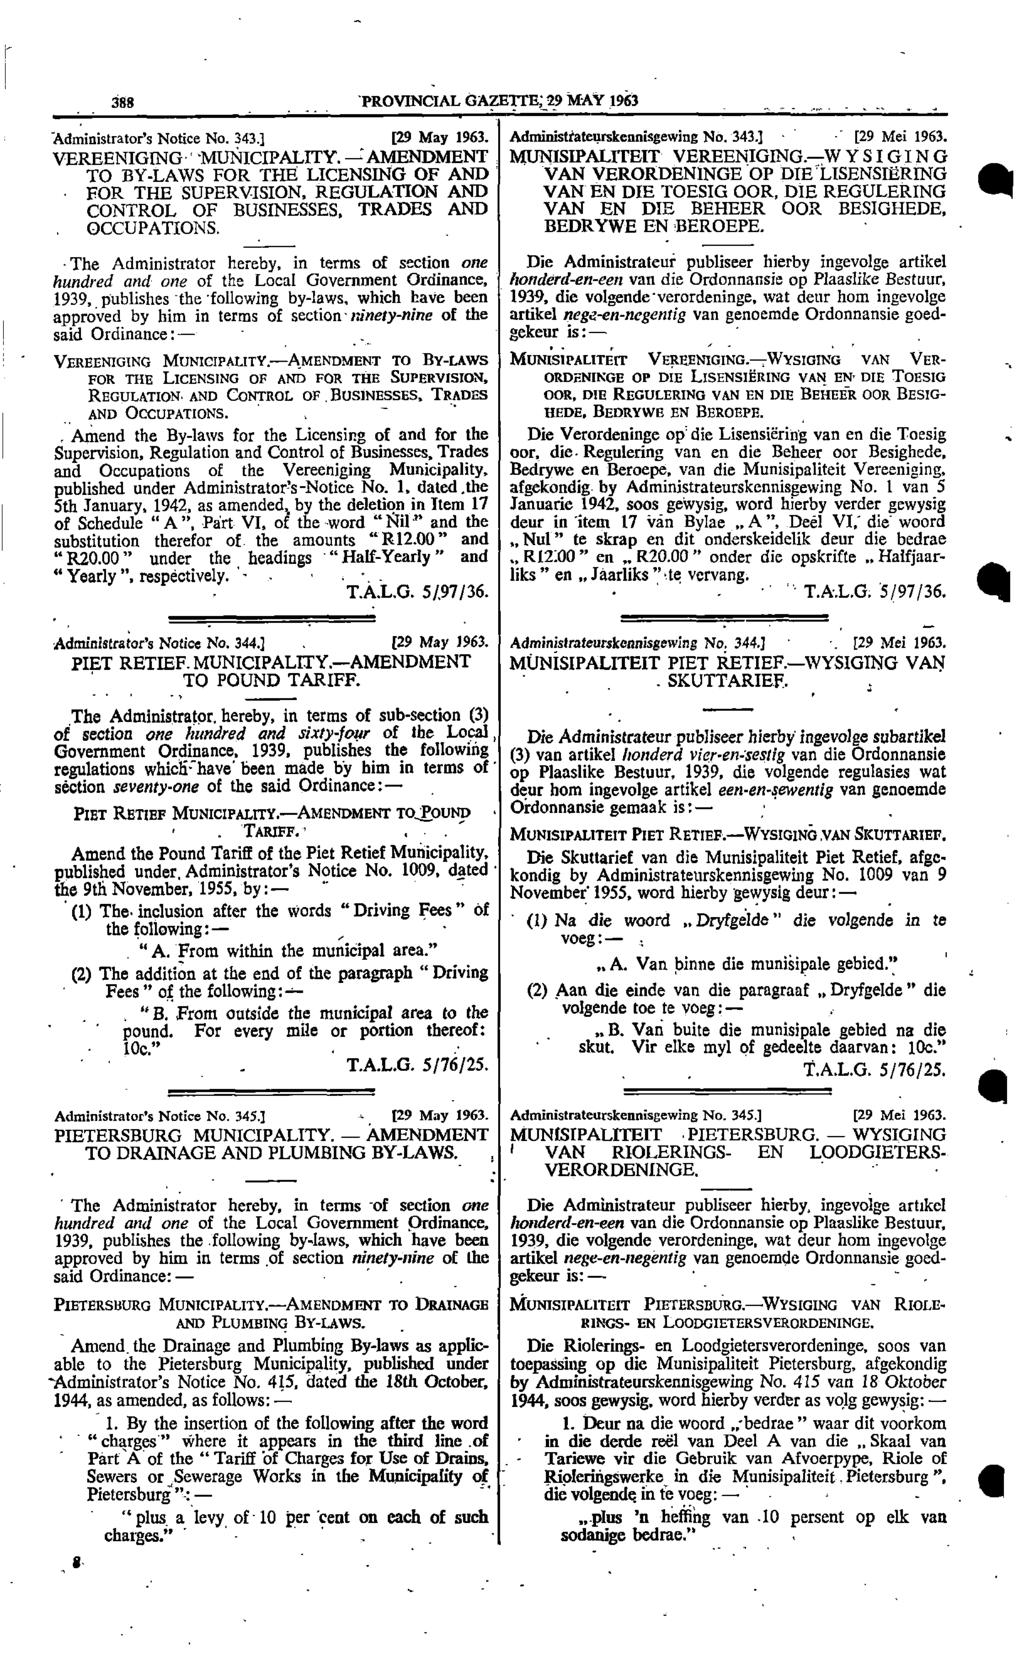 388 PROVNCAL GAZETTE 29 MAY 1963 Administrators Notice No 343] [29 May 1963 Administrateurskennisgewing No 343] [29 Mei 1963 VEREENGNG MUNCPALTY :AMENDMENT MUNSPALTET VEREENGNGcW Y S GN G TO BYLAWS